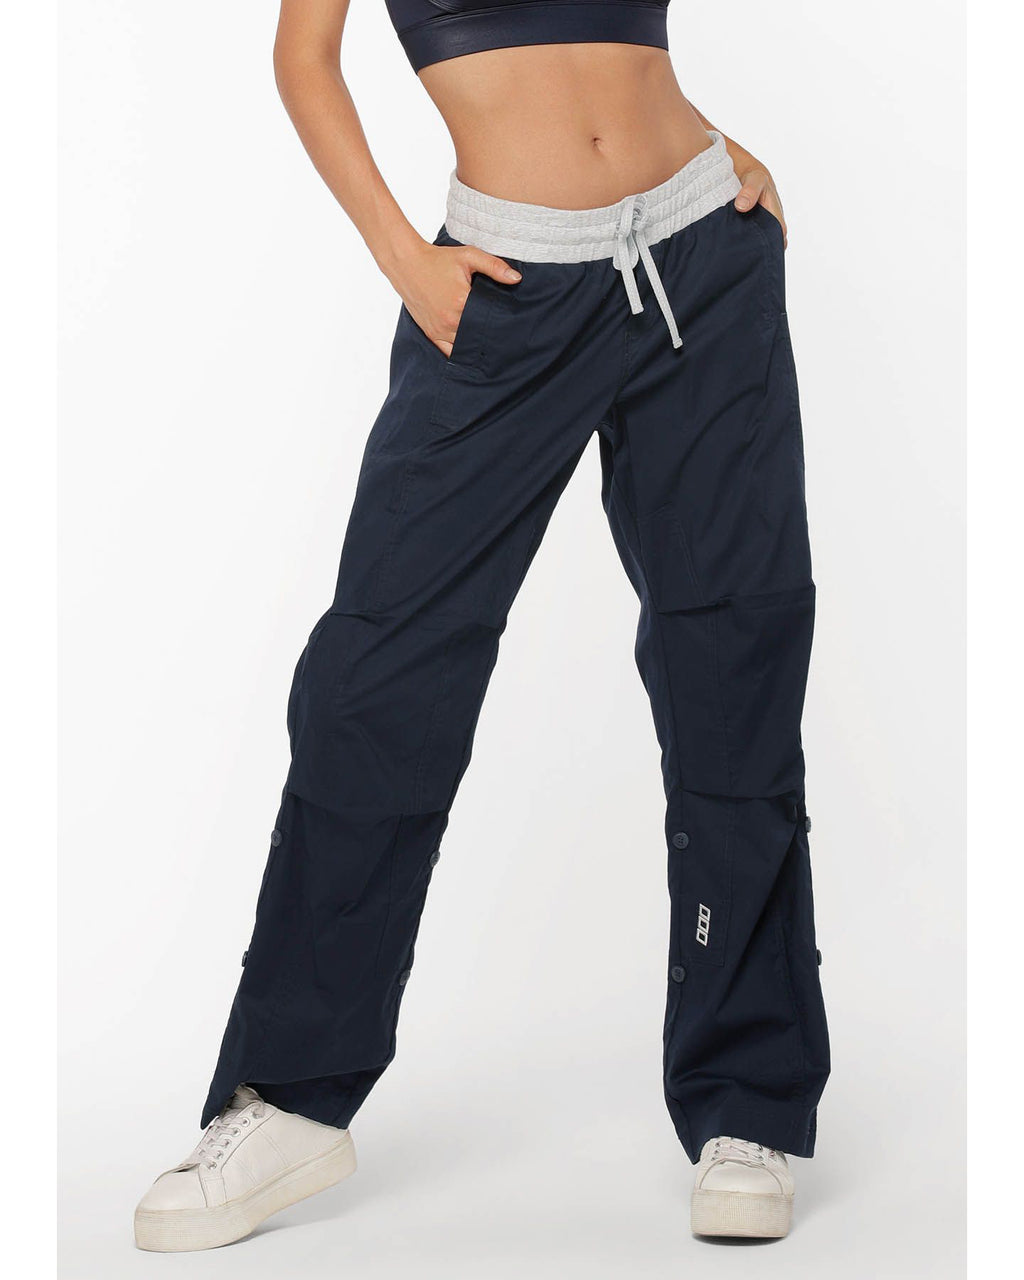 Lorna Jane Active - For the lovers of our iconic Flashdance Pant